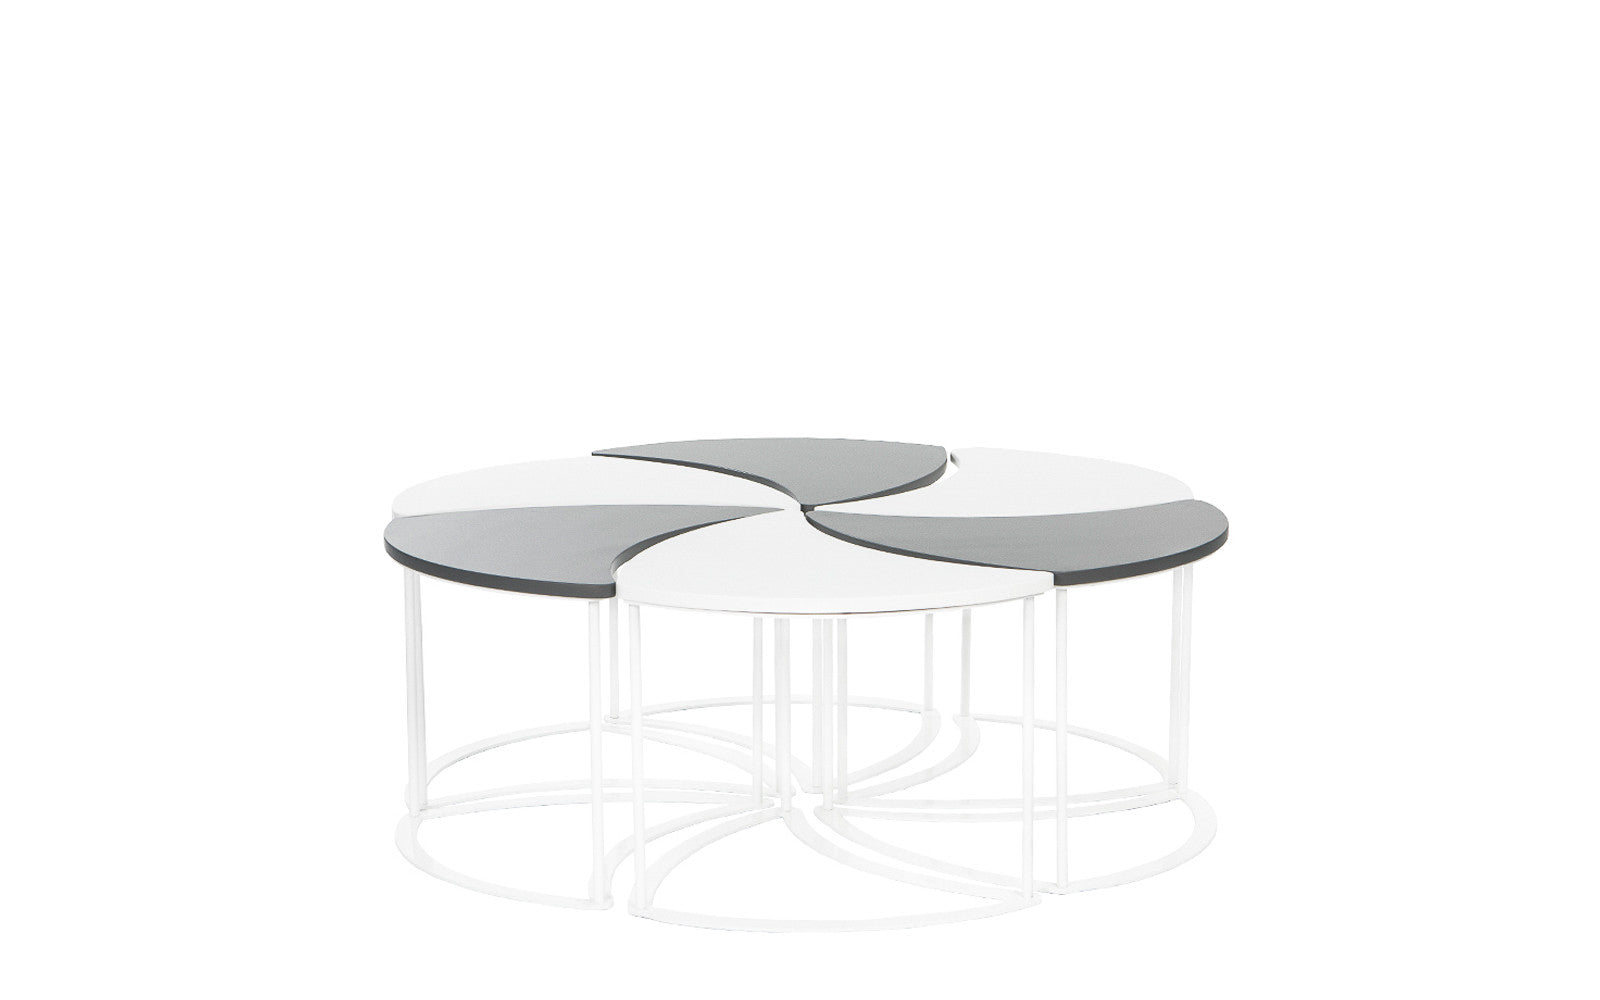 Spiral Contemporary 70s Inspired Two Tone Modular Outdoor Coffee Table